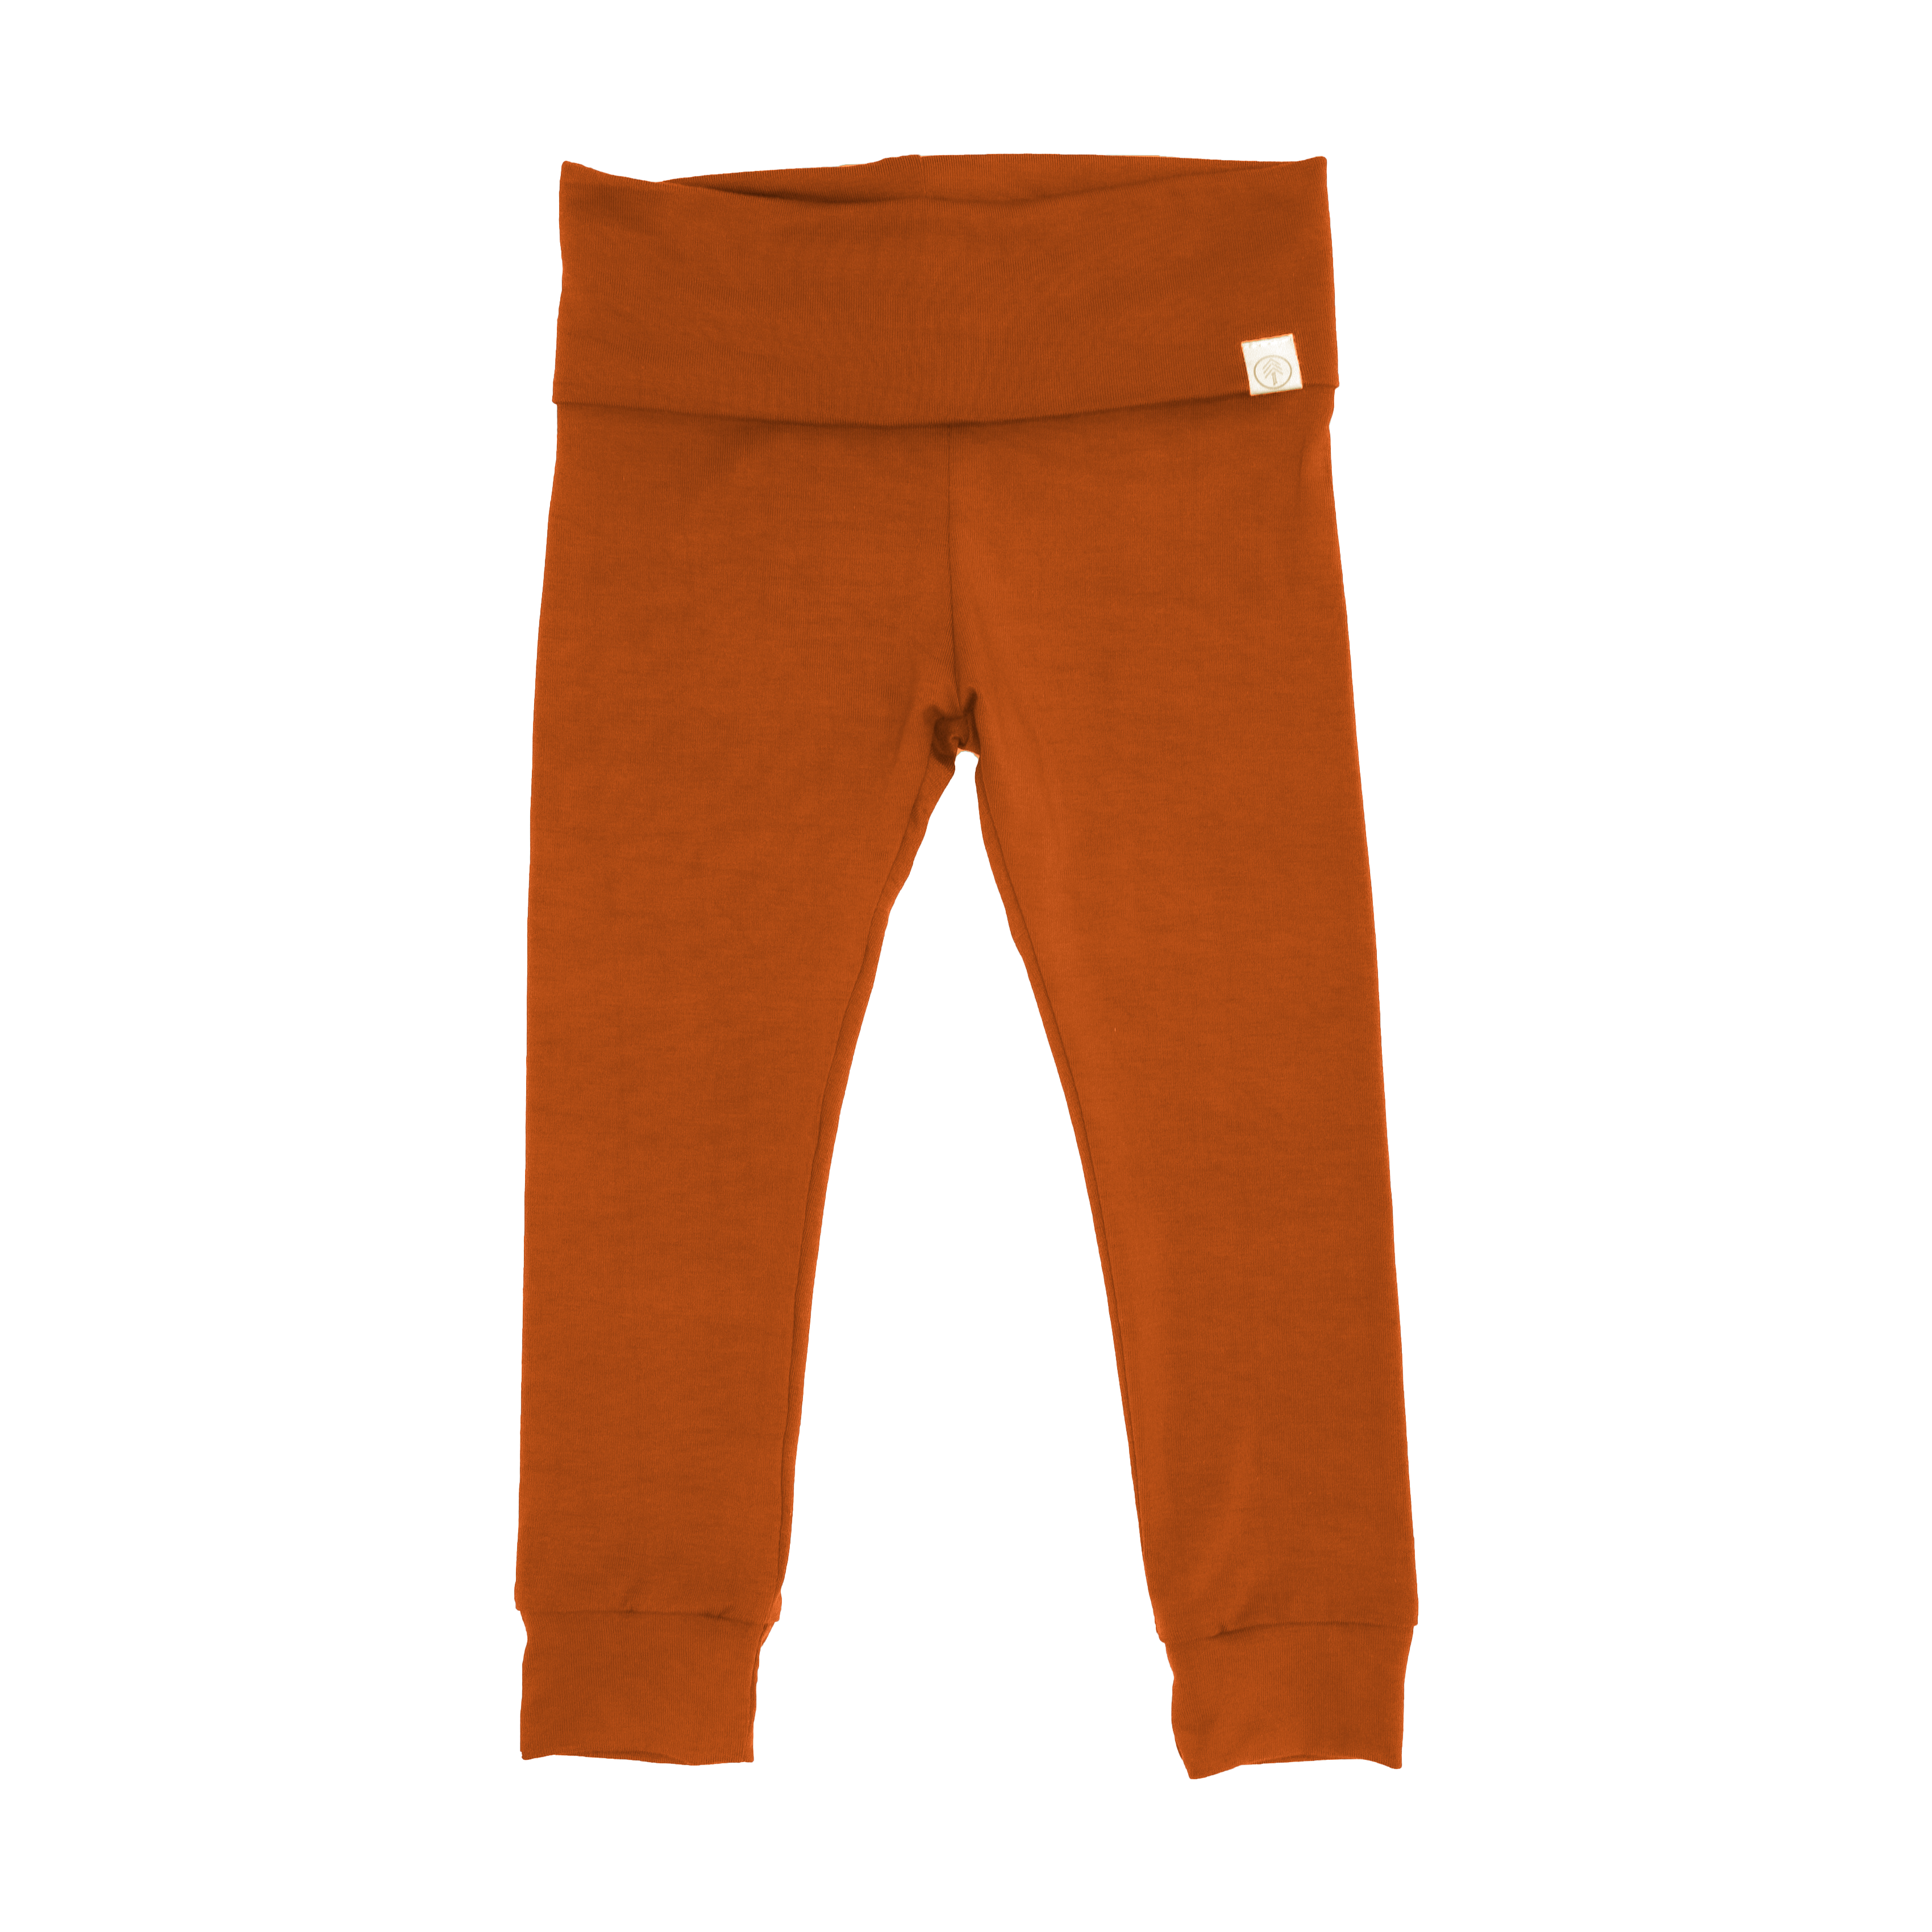 Bamboo Leggings - Pants - Rust - Tenth and Pine - Organic Baby Clothes